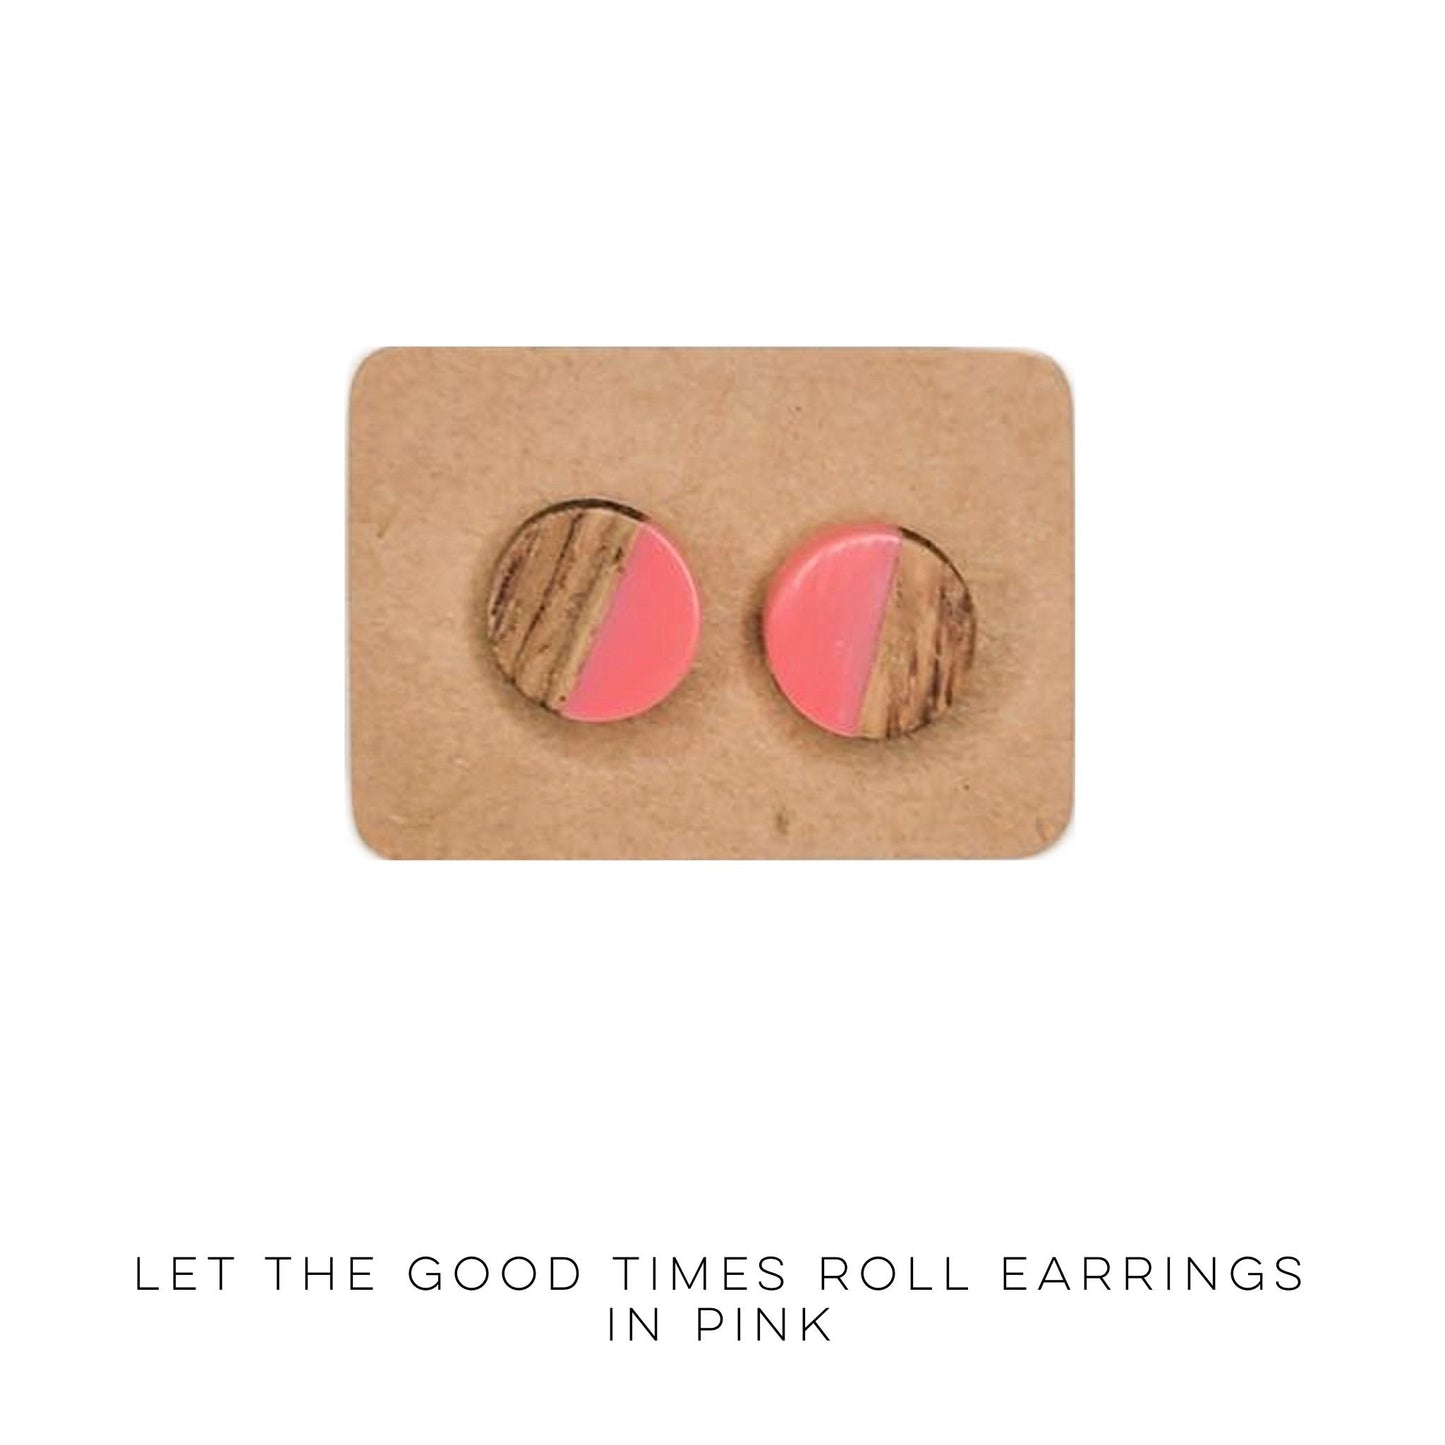 Let The Good Times Roll Earrings in Pink